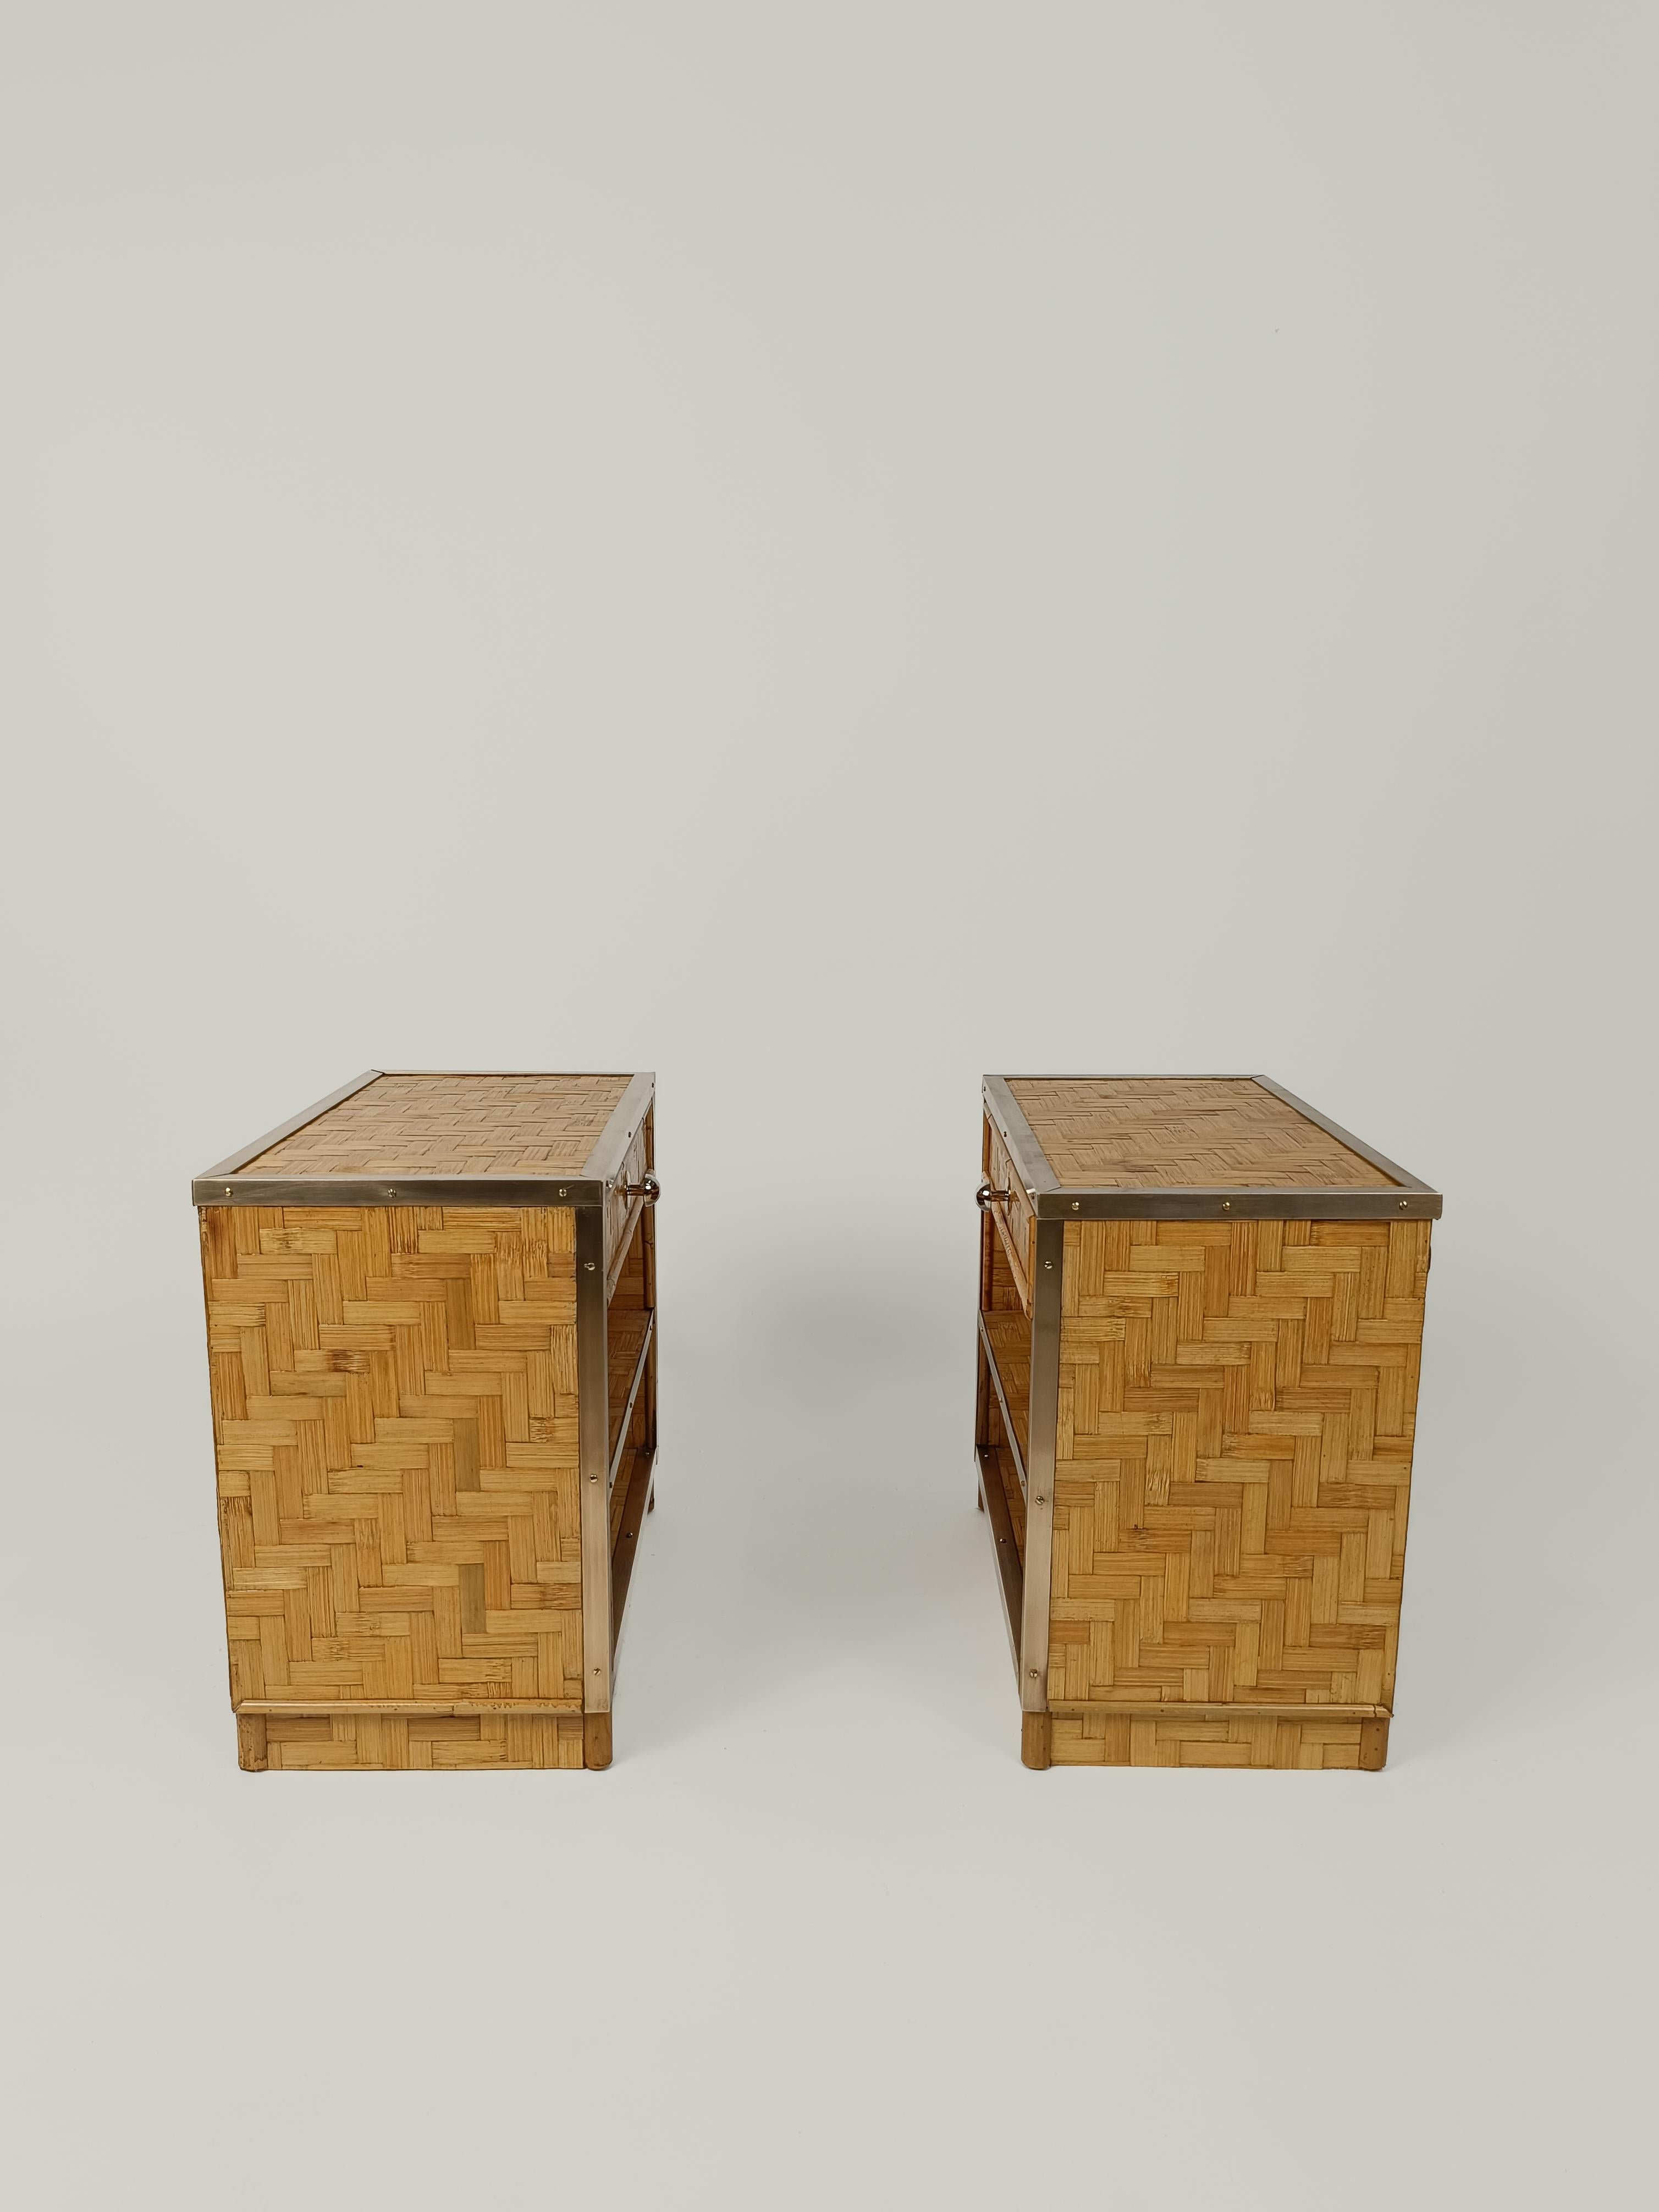 Midcentury Italian Bedside Tables in Bamboo Cane, Rattan and Brass, 1970s For Sale 3